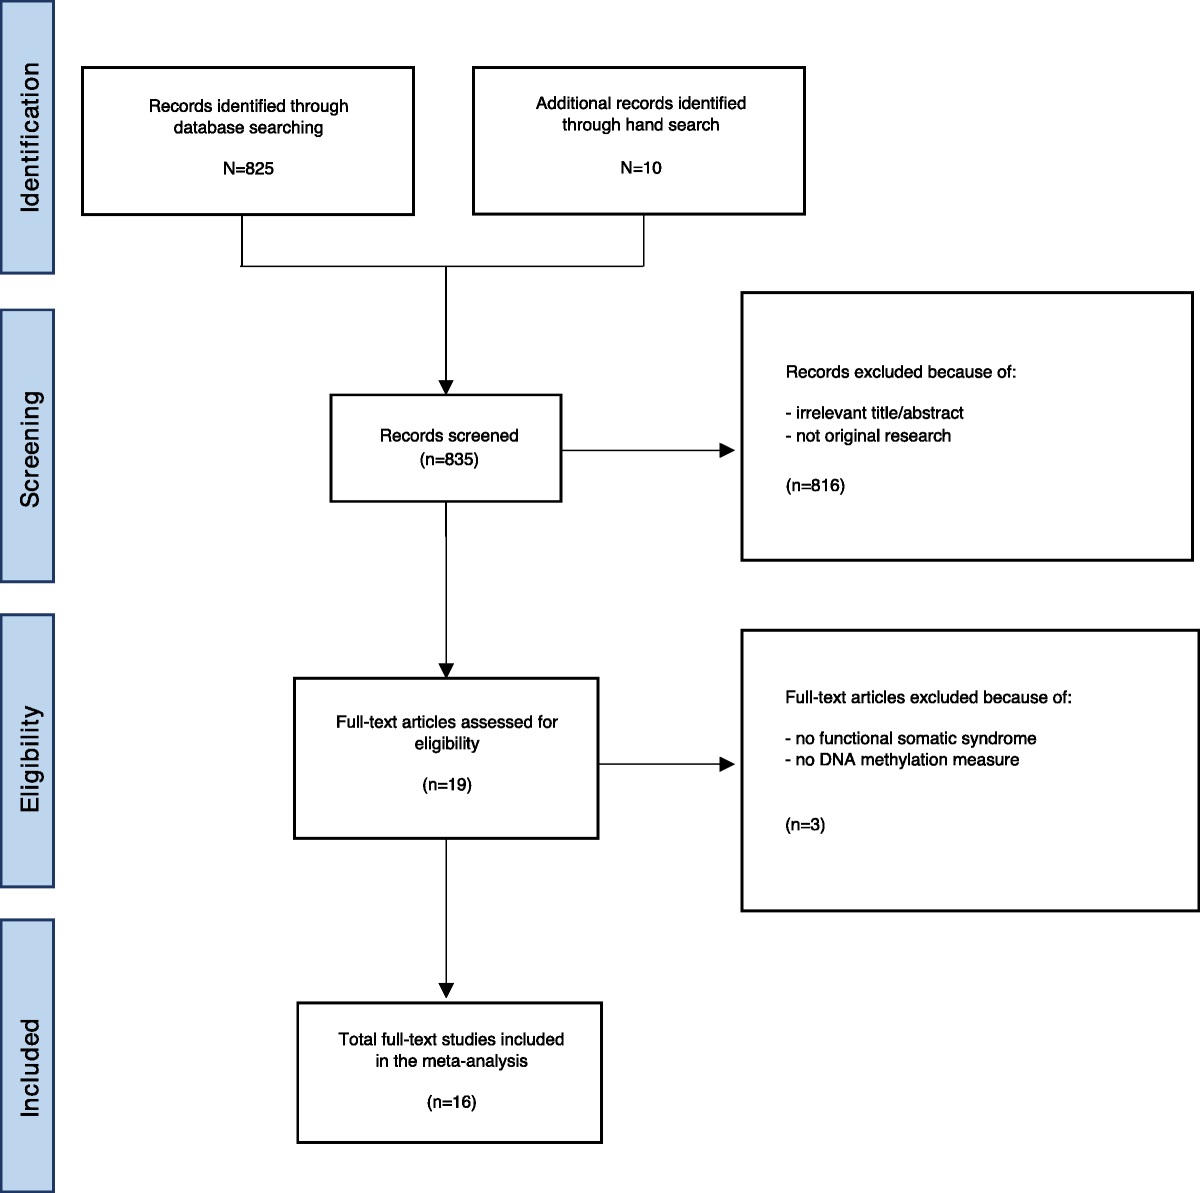 DNA Methylation Signatures of Functional Somatic Syndromes: Systematic Review